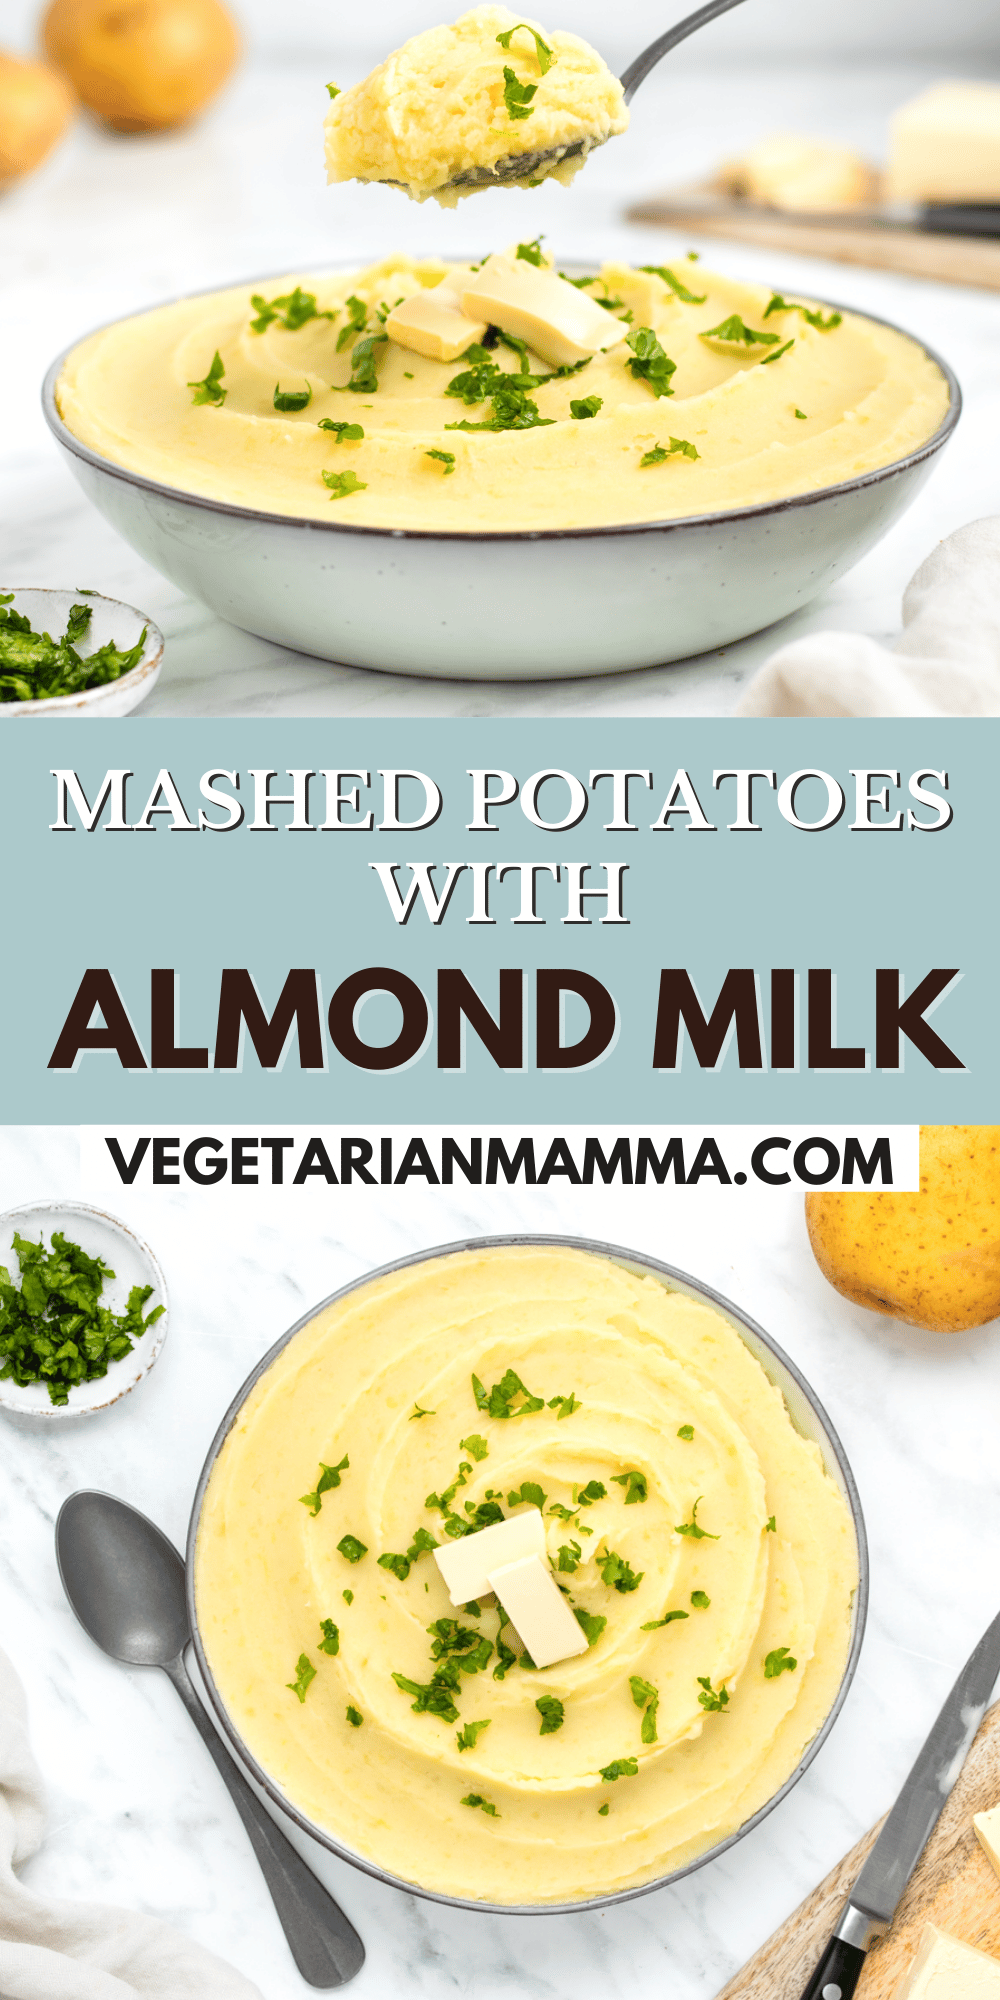 These Mashed Potatoes with Almond Milk are rich, creamy and flavorful! These comforting vegan mashed potatoes are foolproof!  | vegan mashed potato recipe | dairy free mashed potatoes